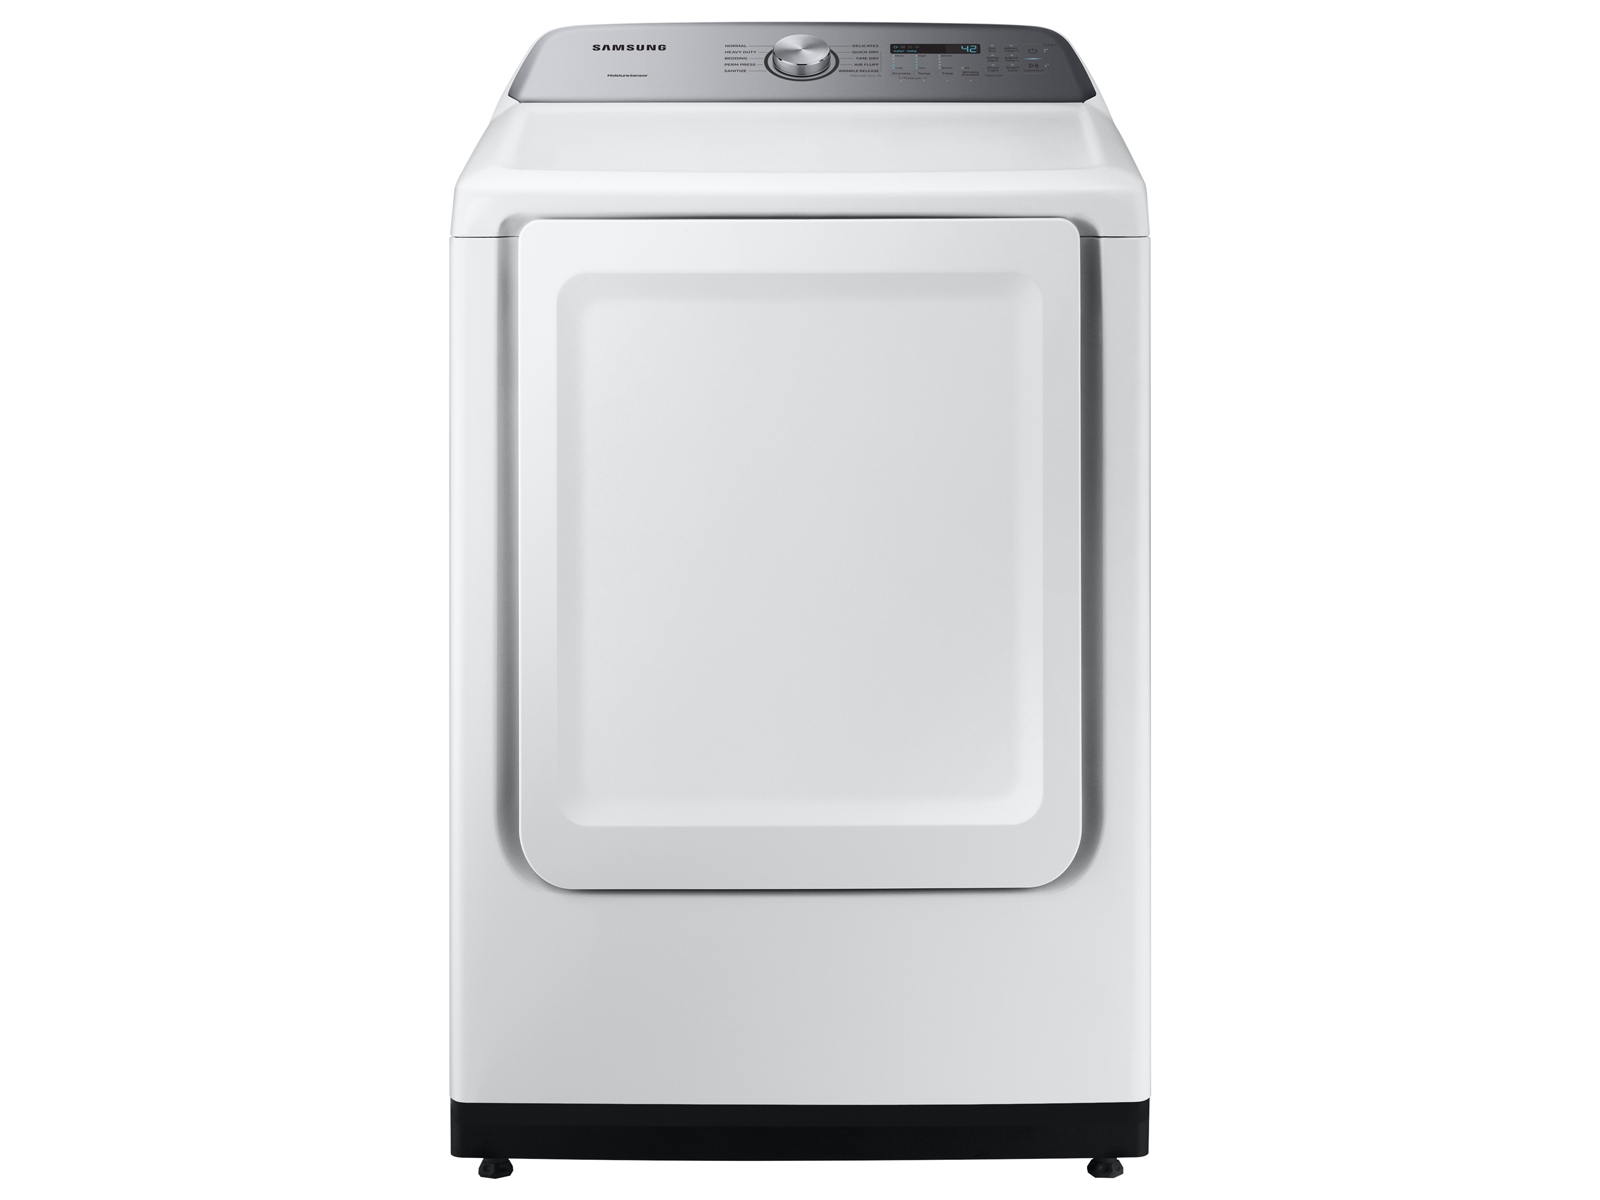 Samsung 7.4 cu. ft. Gas Dryer with Sensor Dry in White(DVG50R5200W/A3)